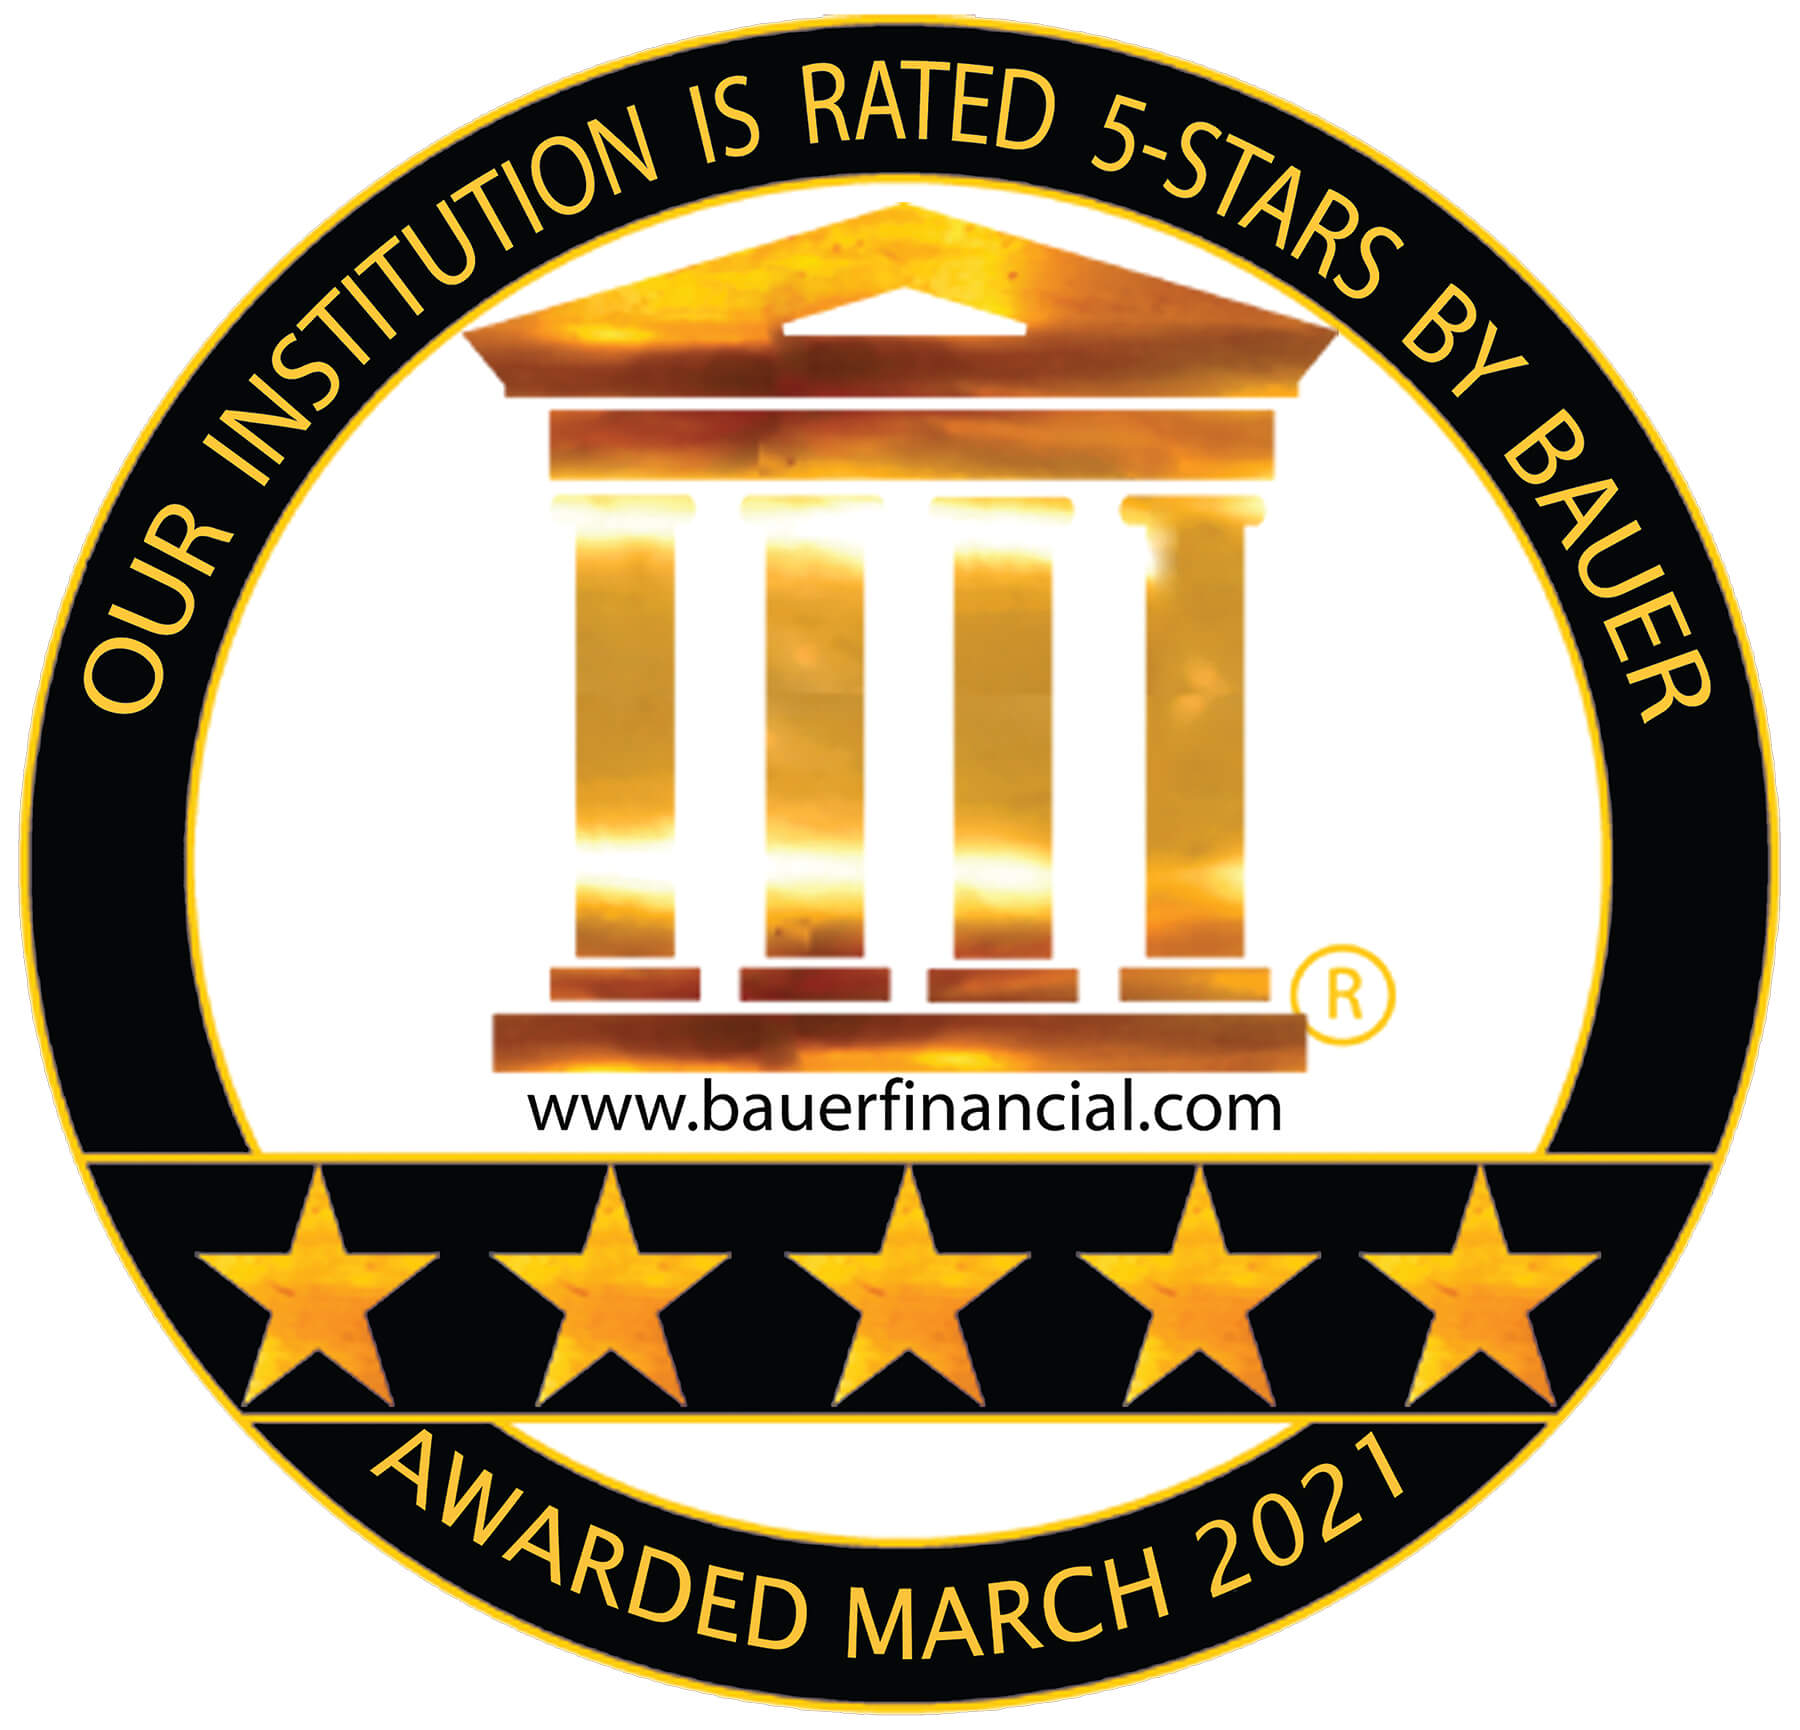 Our Institution is Rated 5-Stars by Bauer